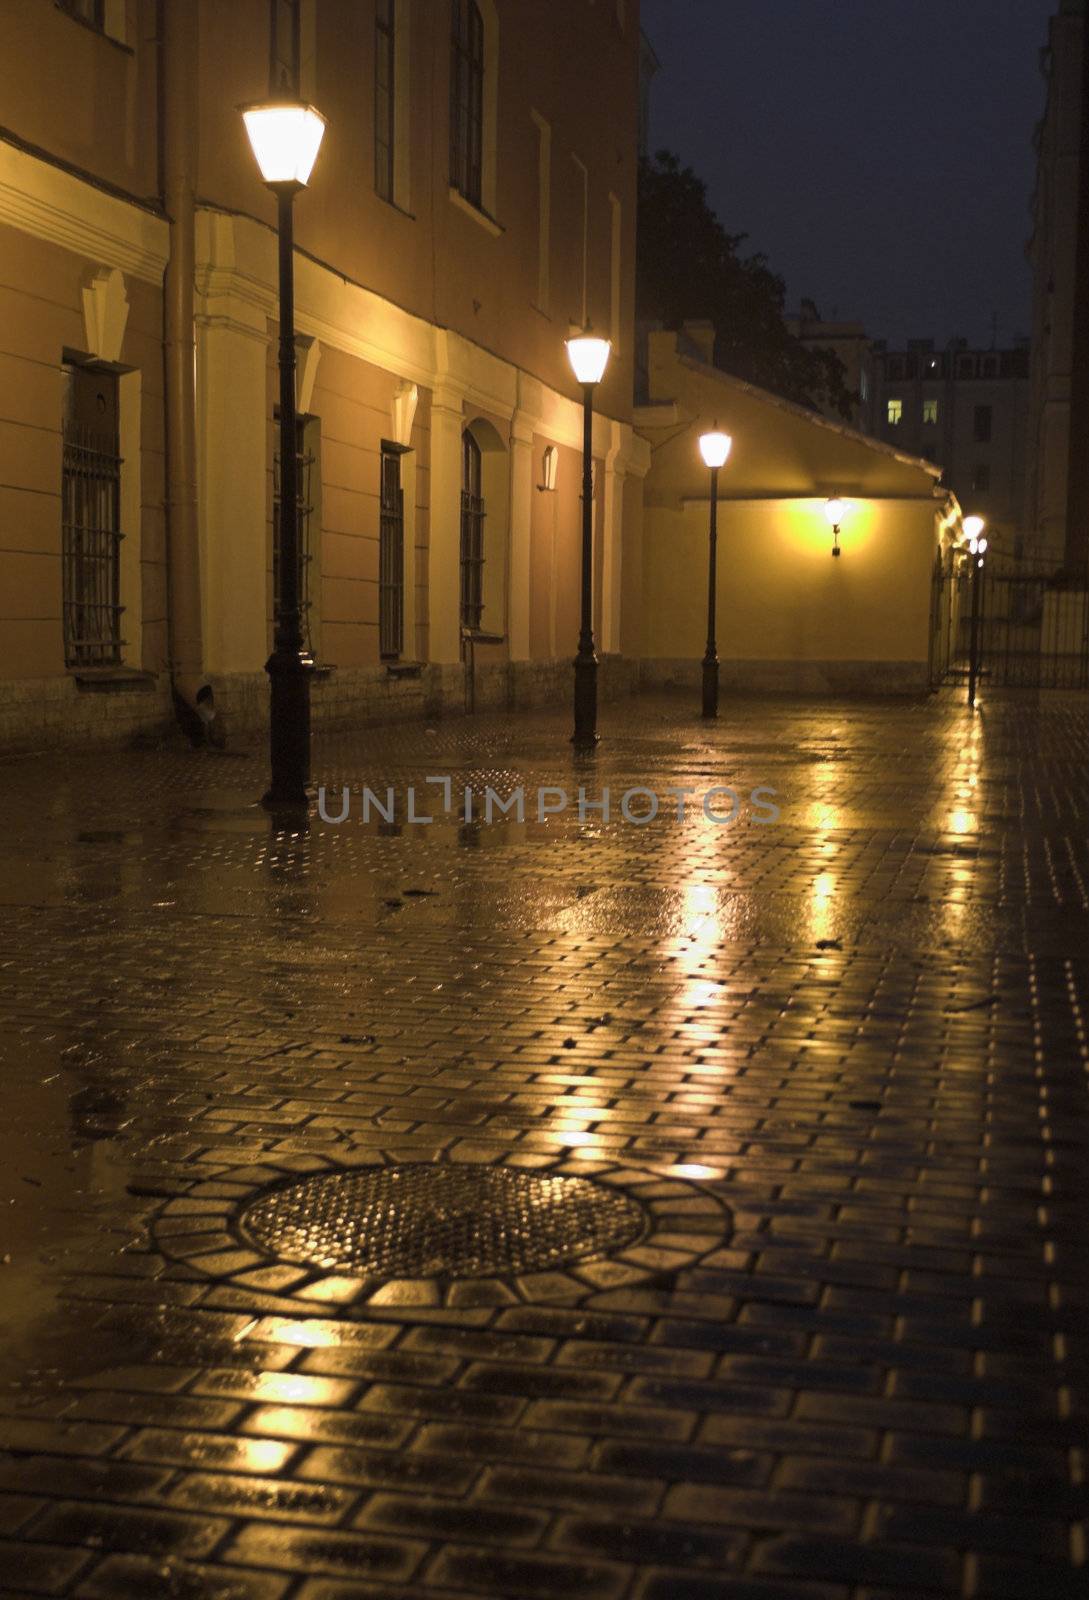 A back yard with street lamps and stone pavement in Saint Petersburg, Russia, at evening.